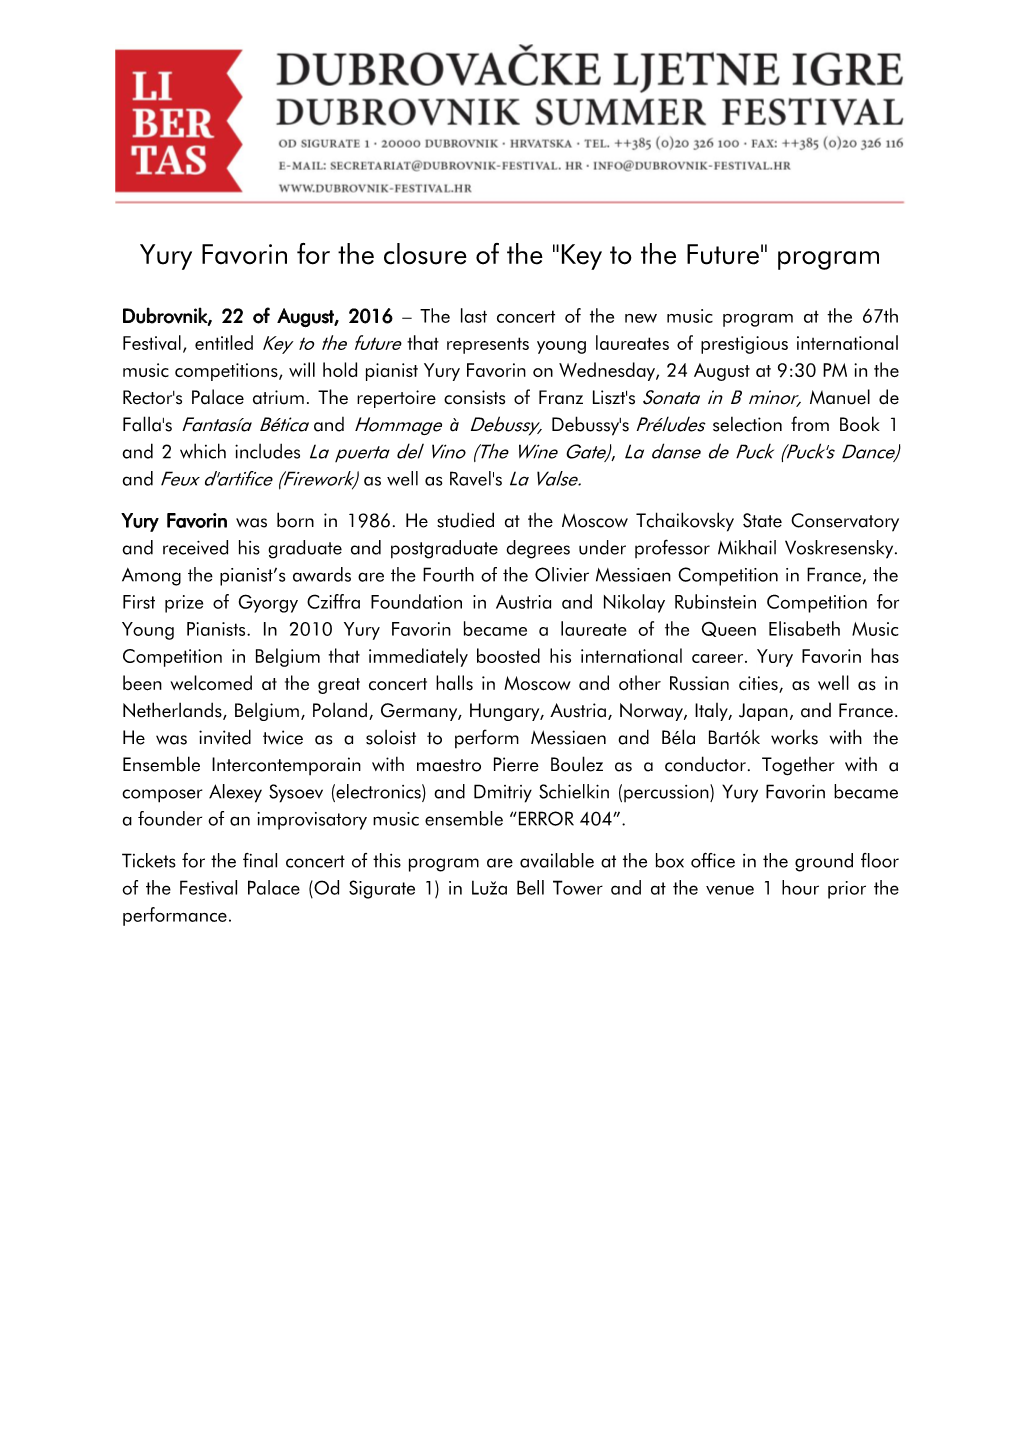 Yury Favorin for the Closure of the "Key to the Future" Program